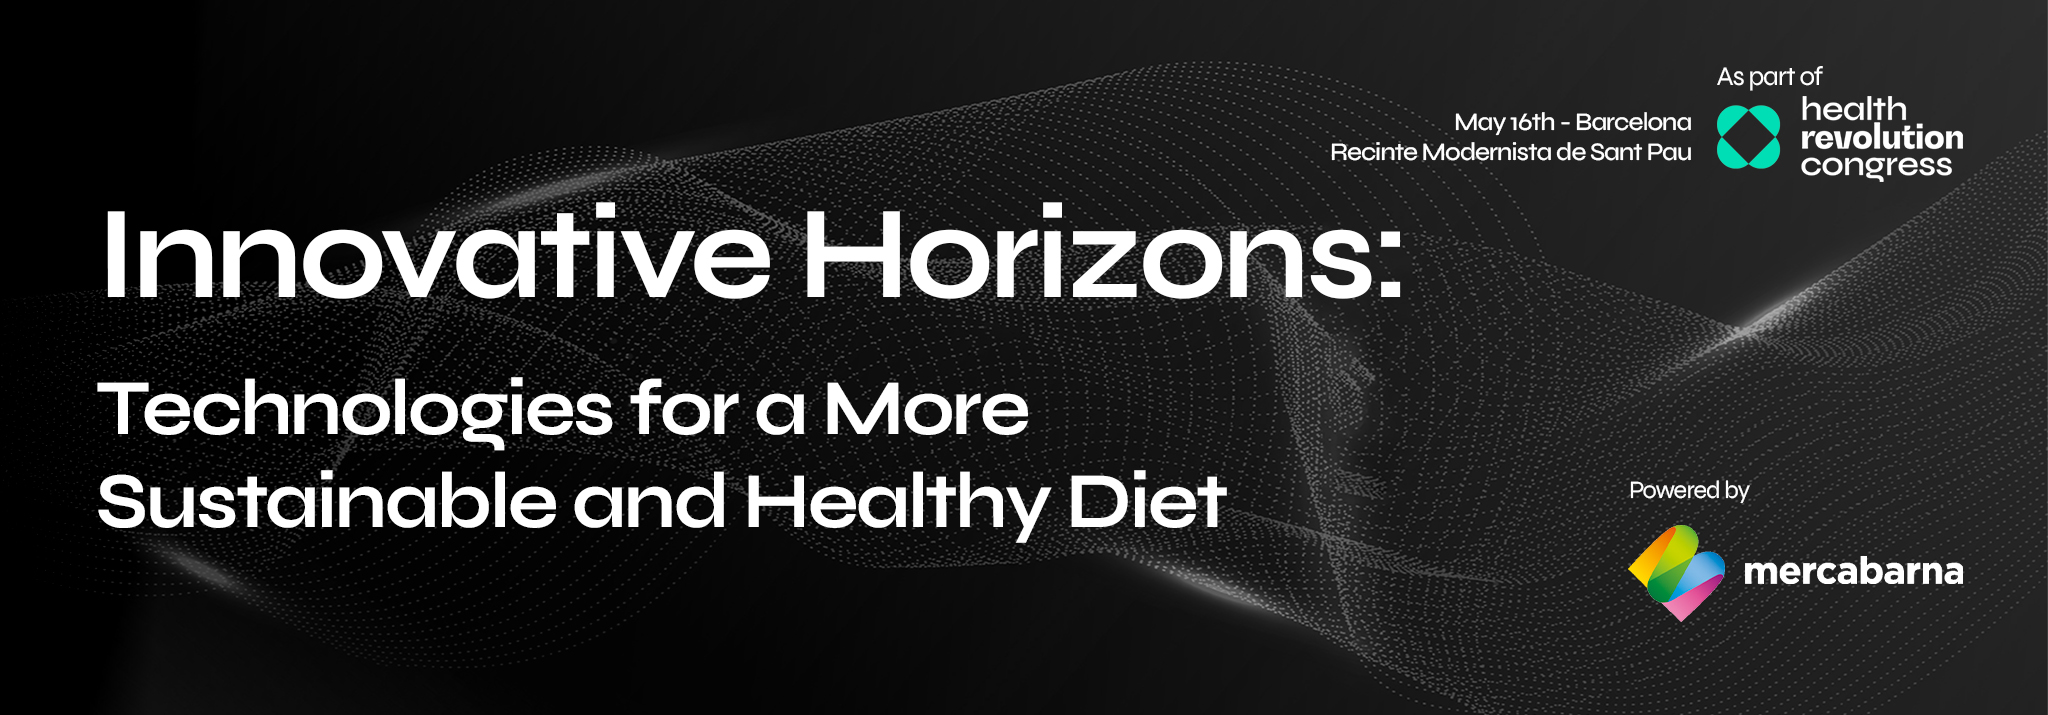 Room Mercabarna: Innovative Horizons | Technologies for a More Sustainable and Healthy Diet